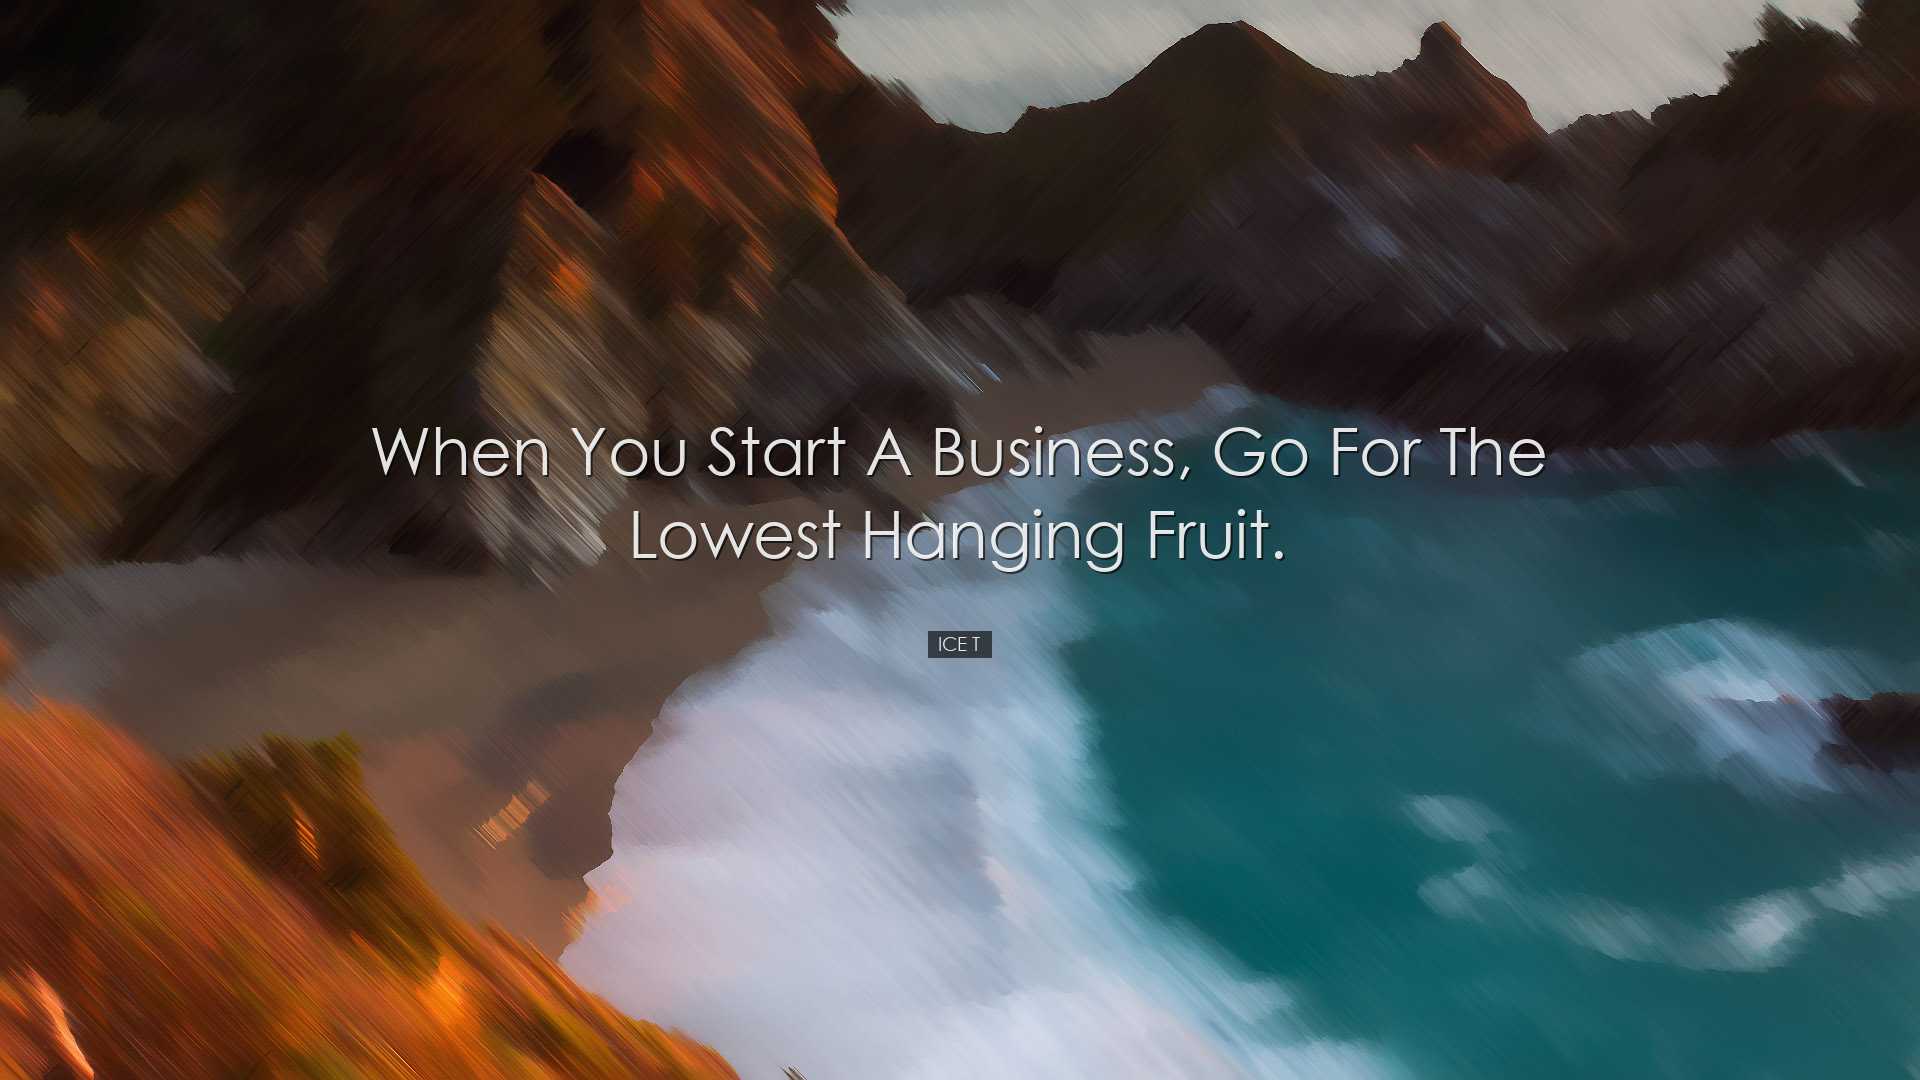 When you start a business, go for the lowest hanging fruit. - Ice